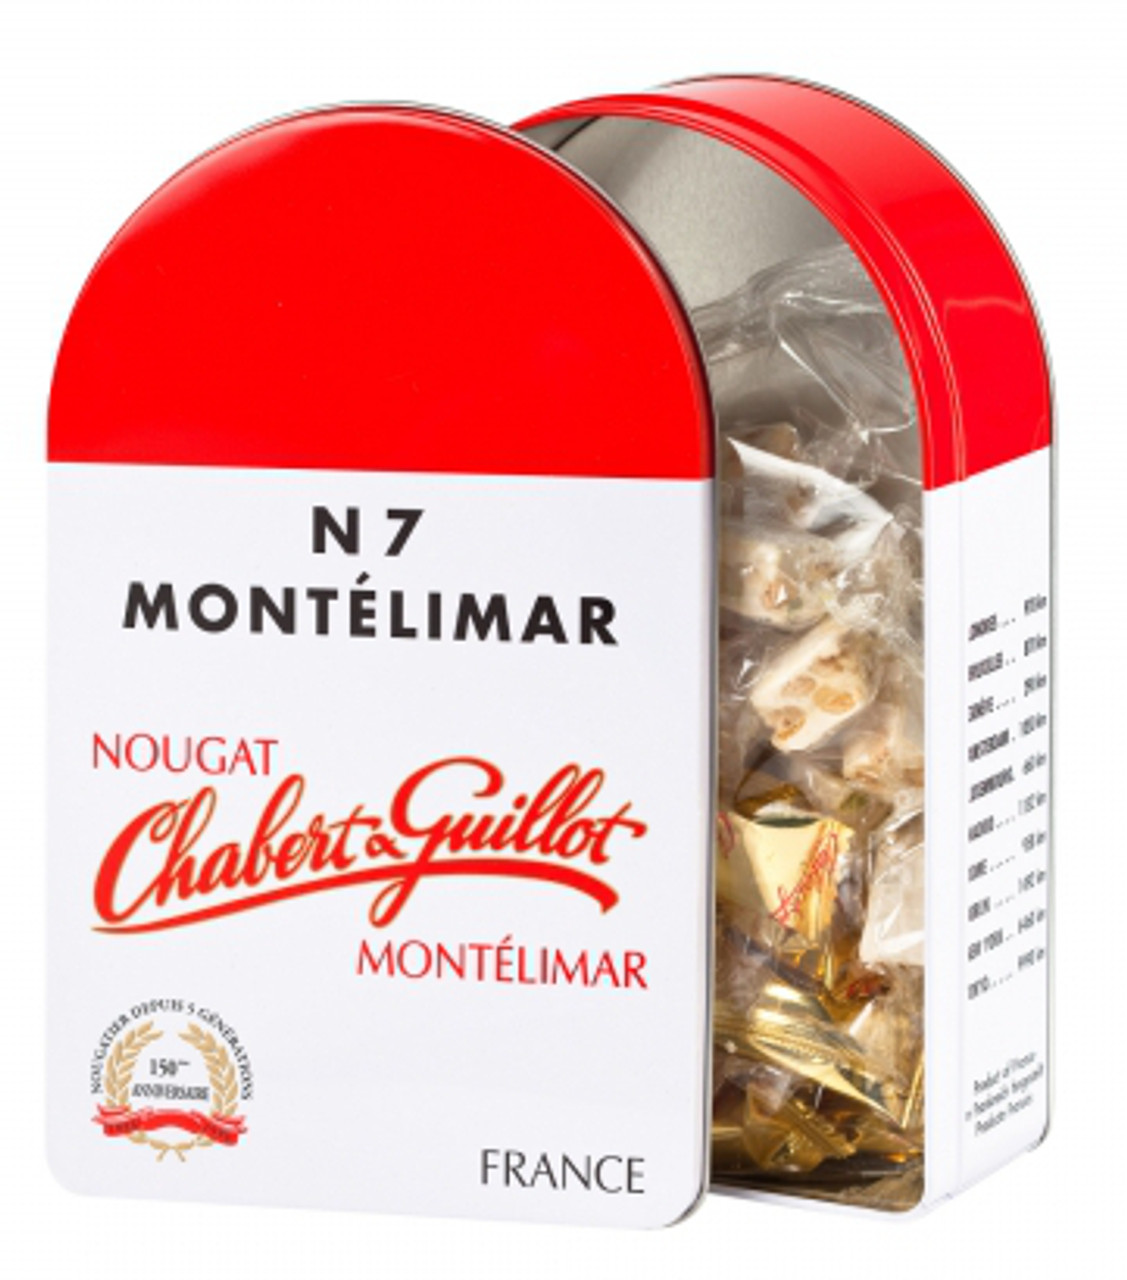 Chabert & Guillot Nougat Pieces in Tin